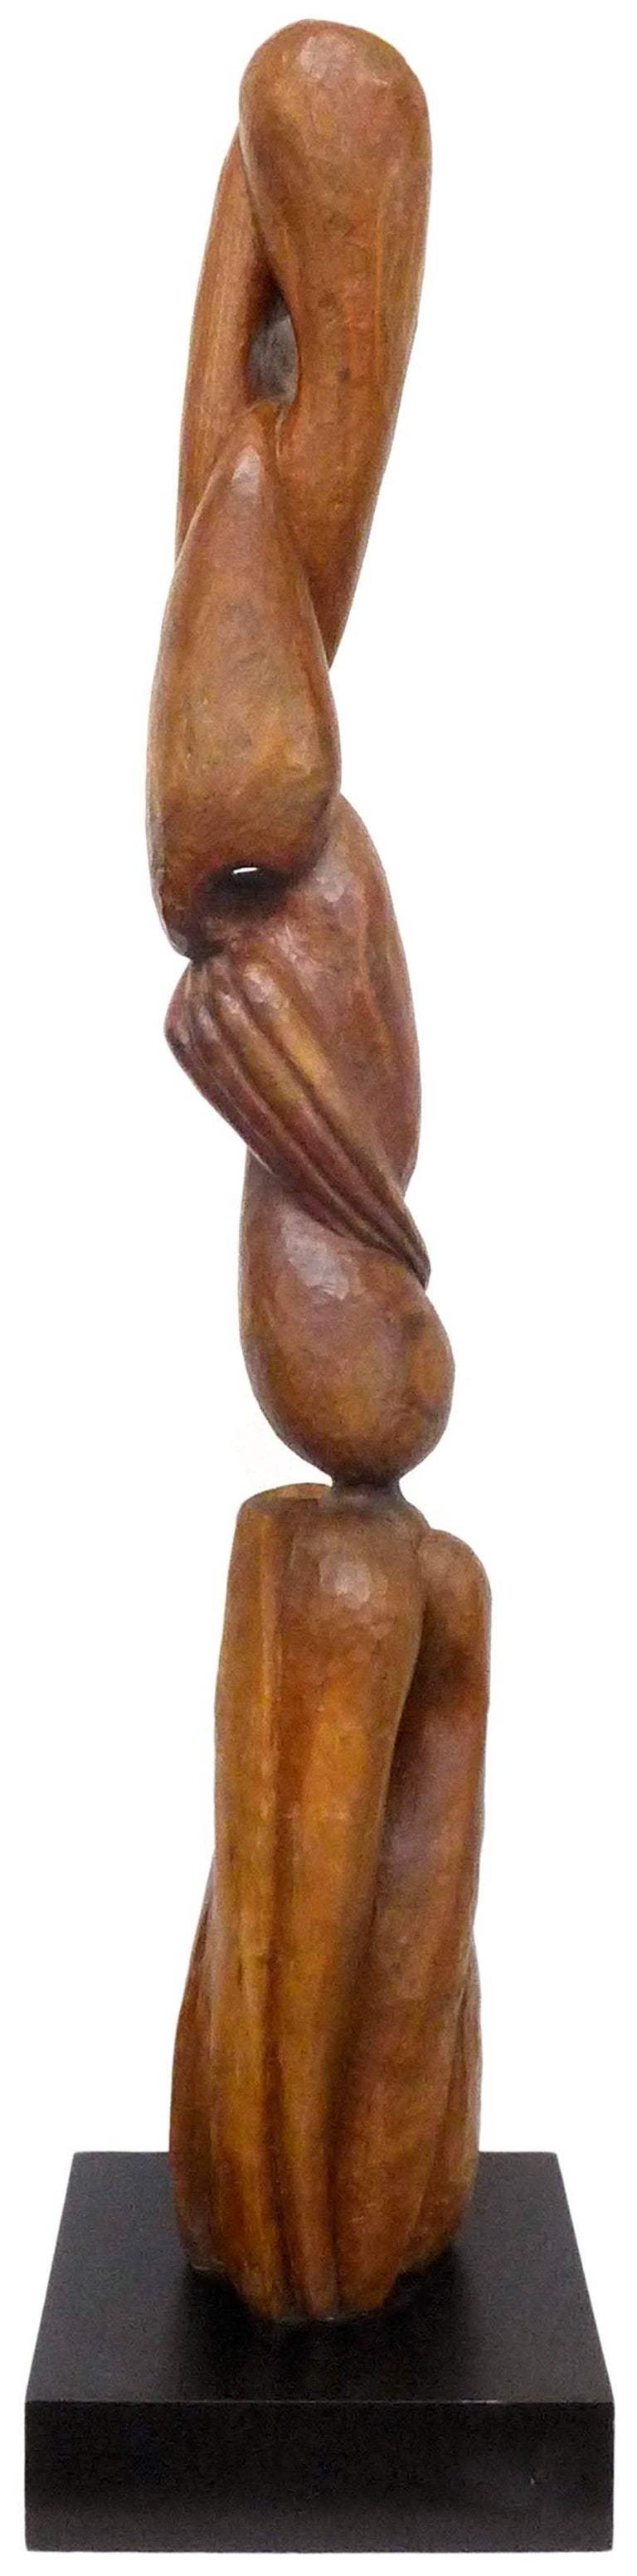 Organic Modern Biomorphic Carved-Wood Sculpture For Sale